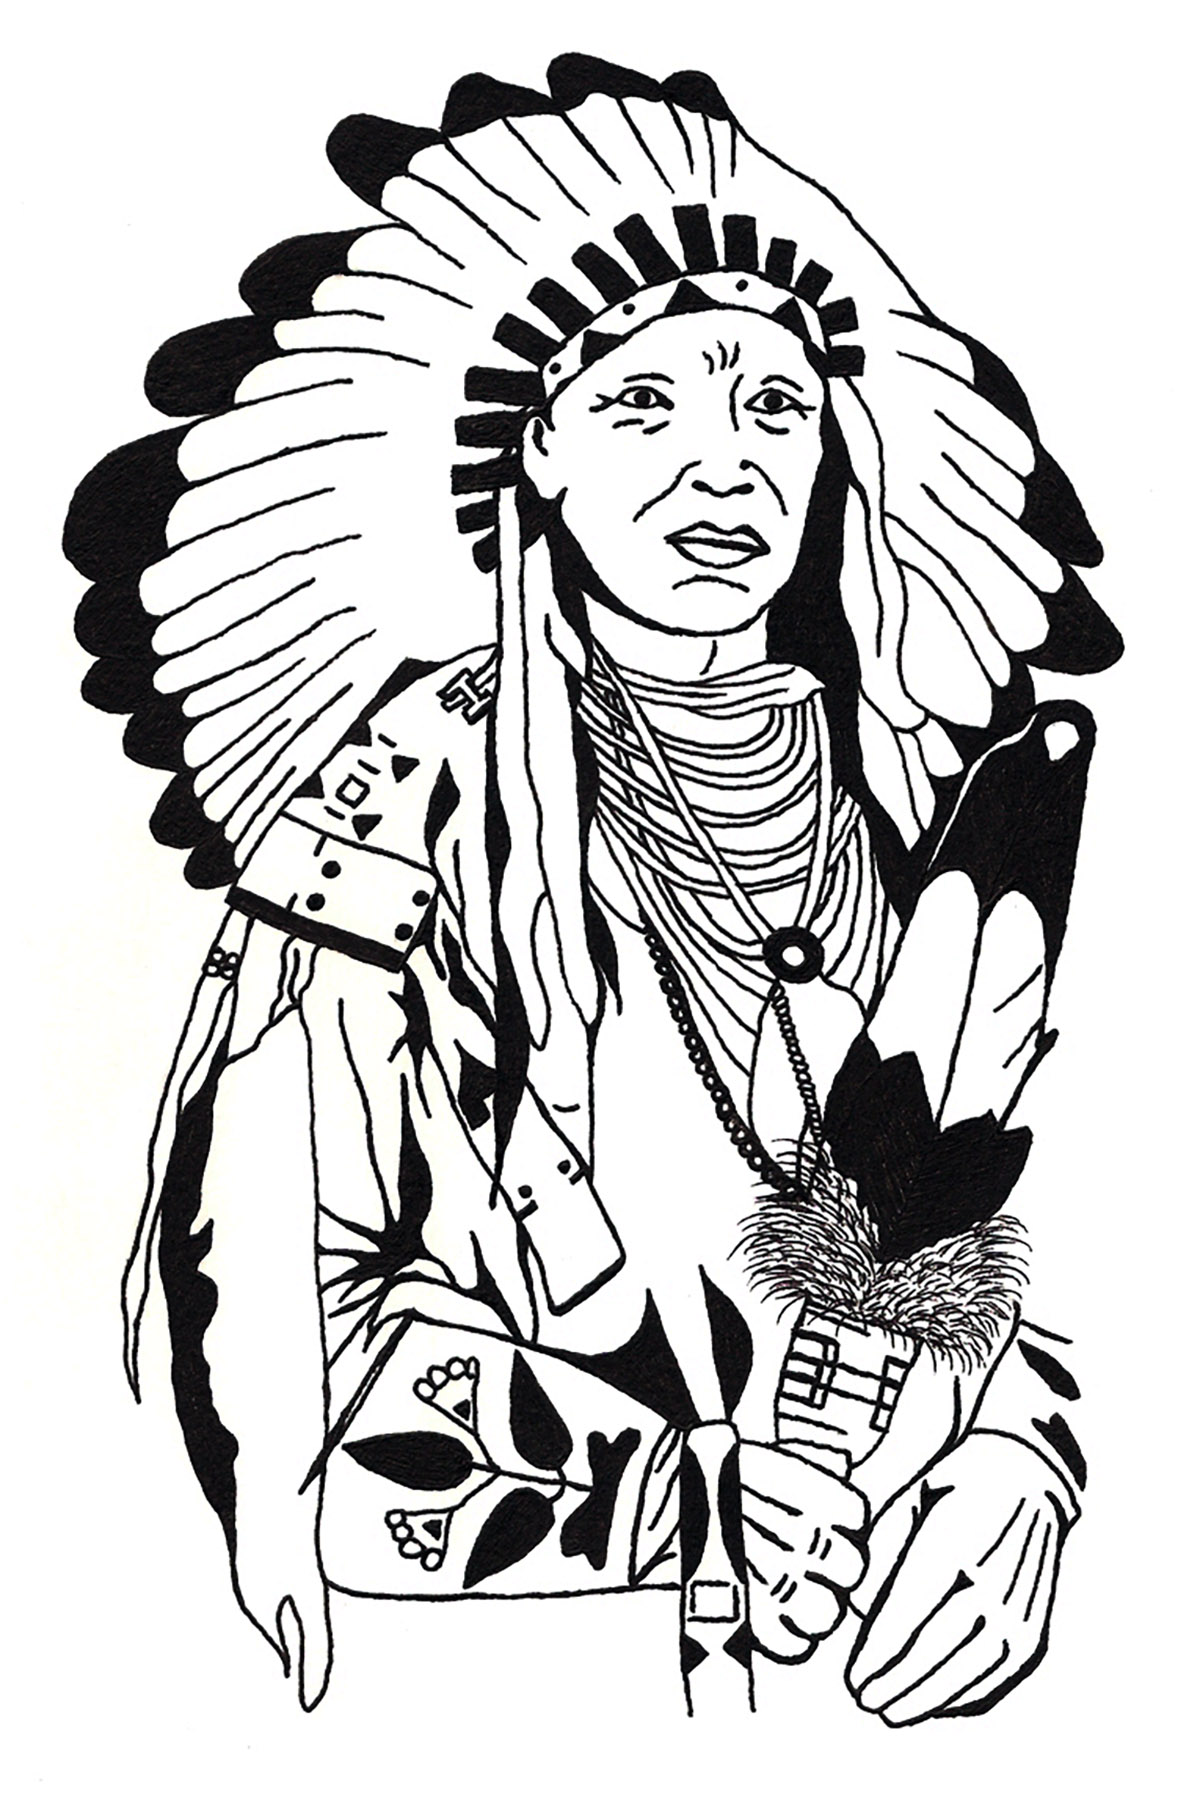 Superb coloring drawing of an American Indian chief